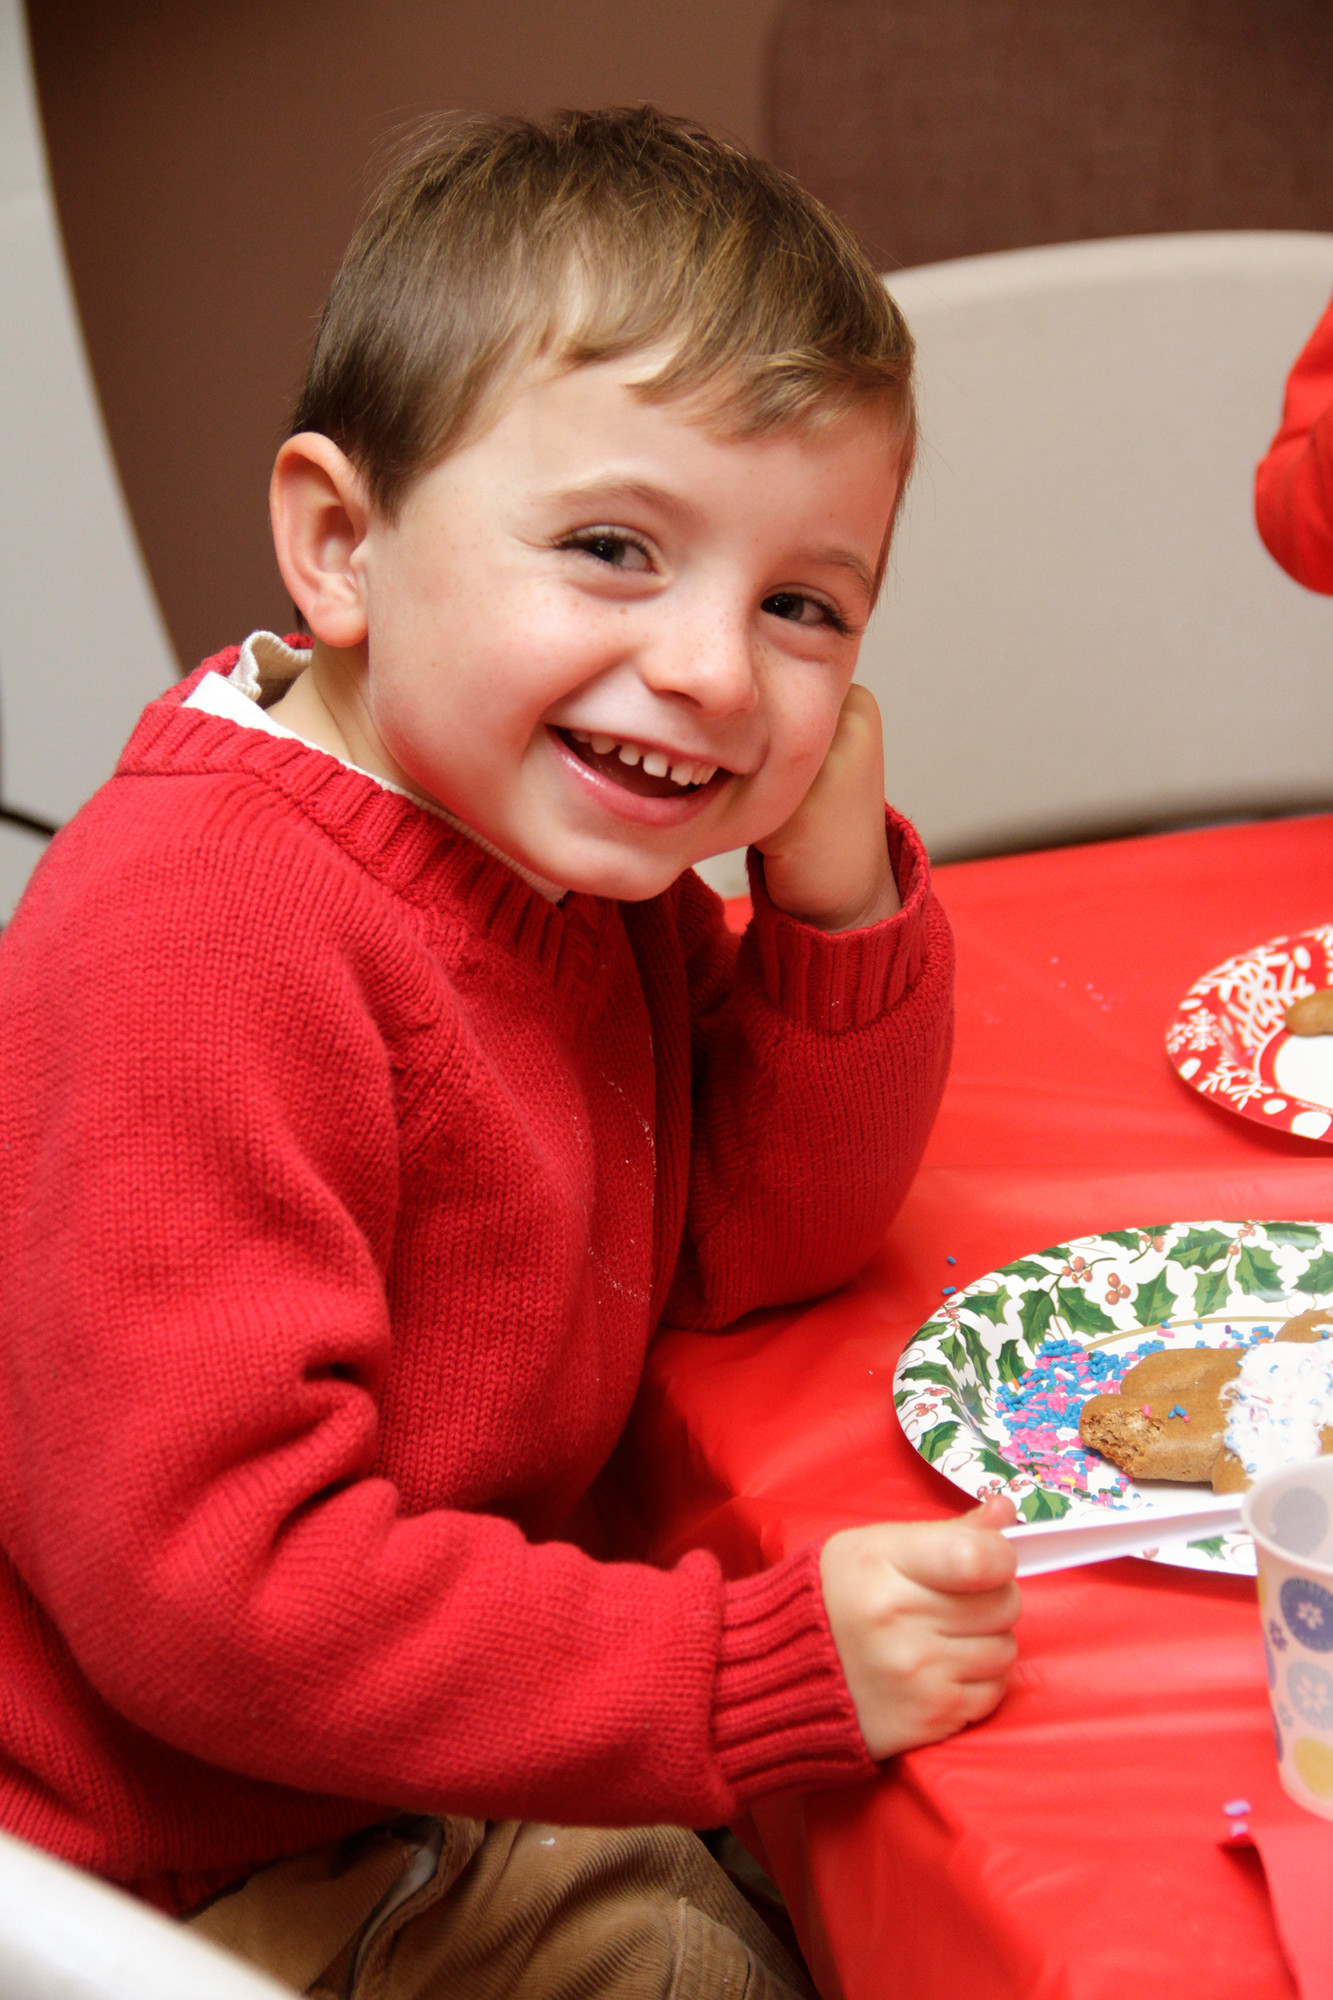 "No flash photography, please!" says 5-year old Luke McKeon during Malverne's cookie workshop.